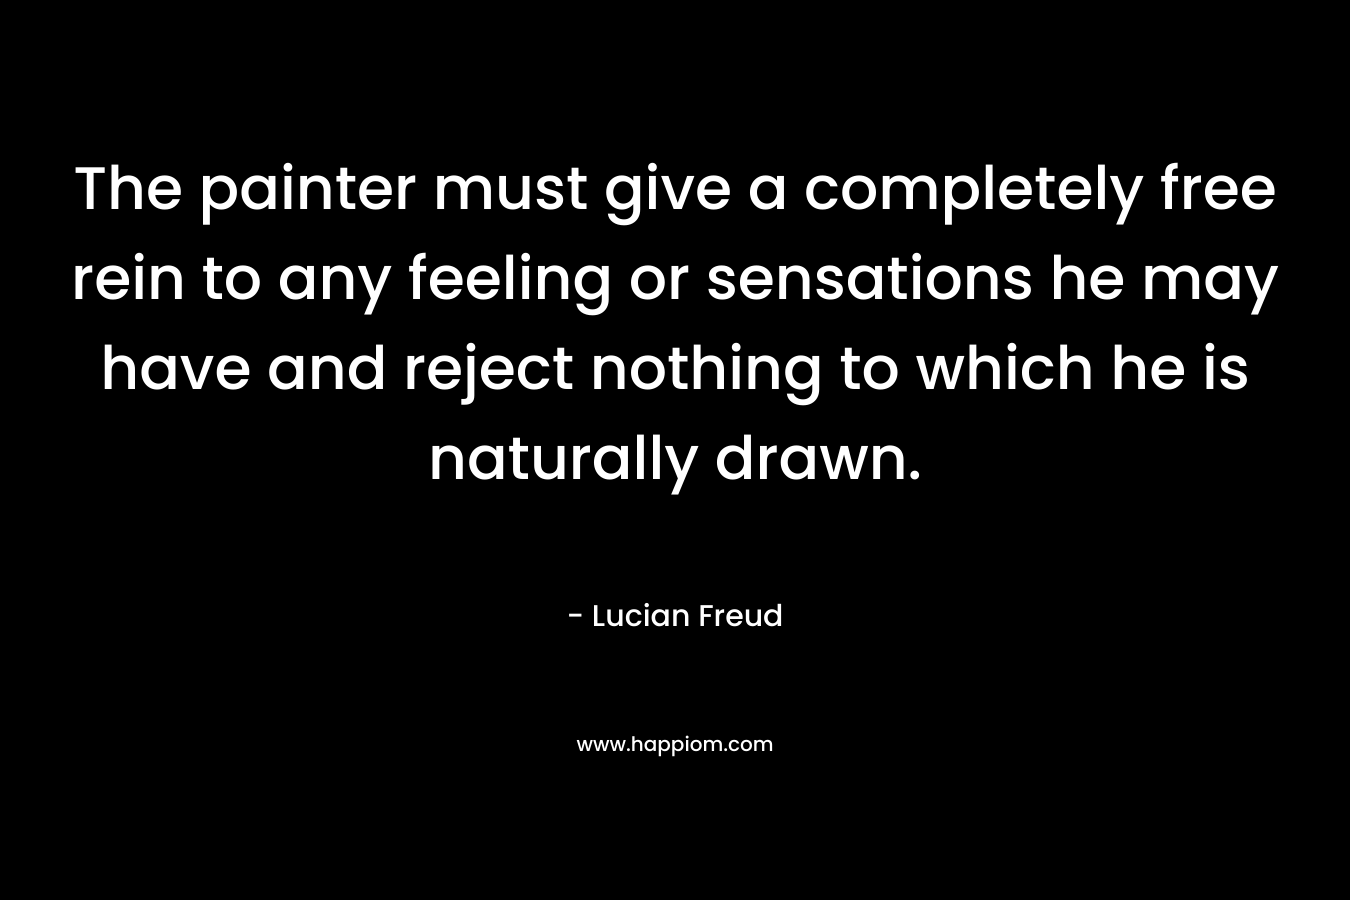 The painter must give a completely free rein to any feeling or sensations he may have and reject nothing to which he is naturally drawn. – Lucian Freud